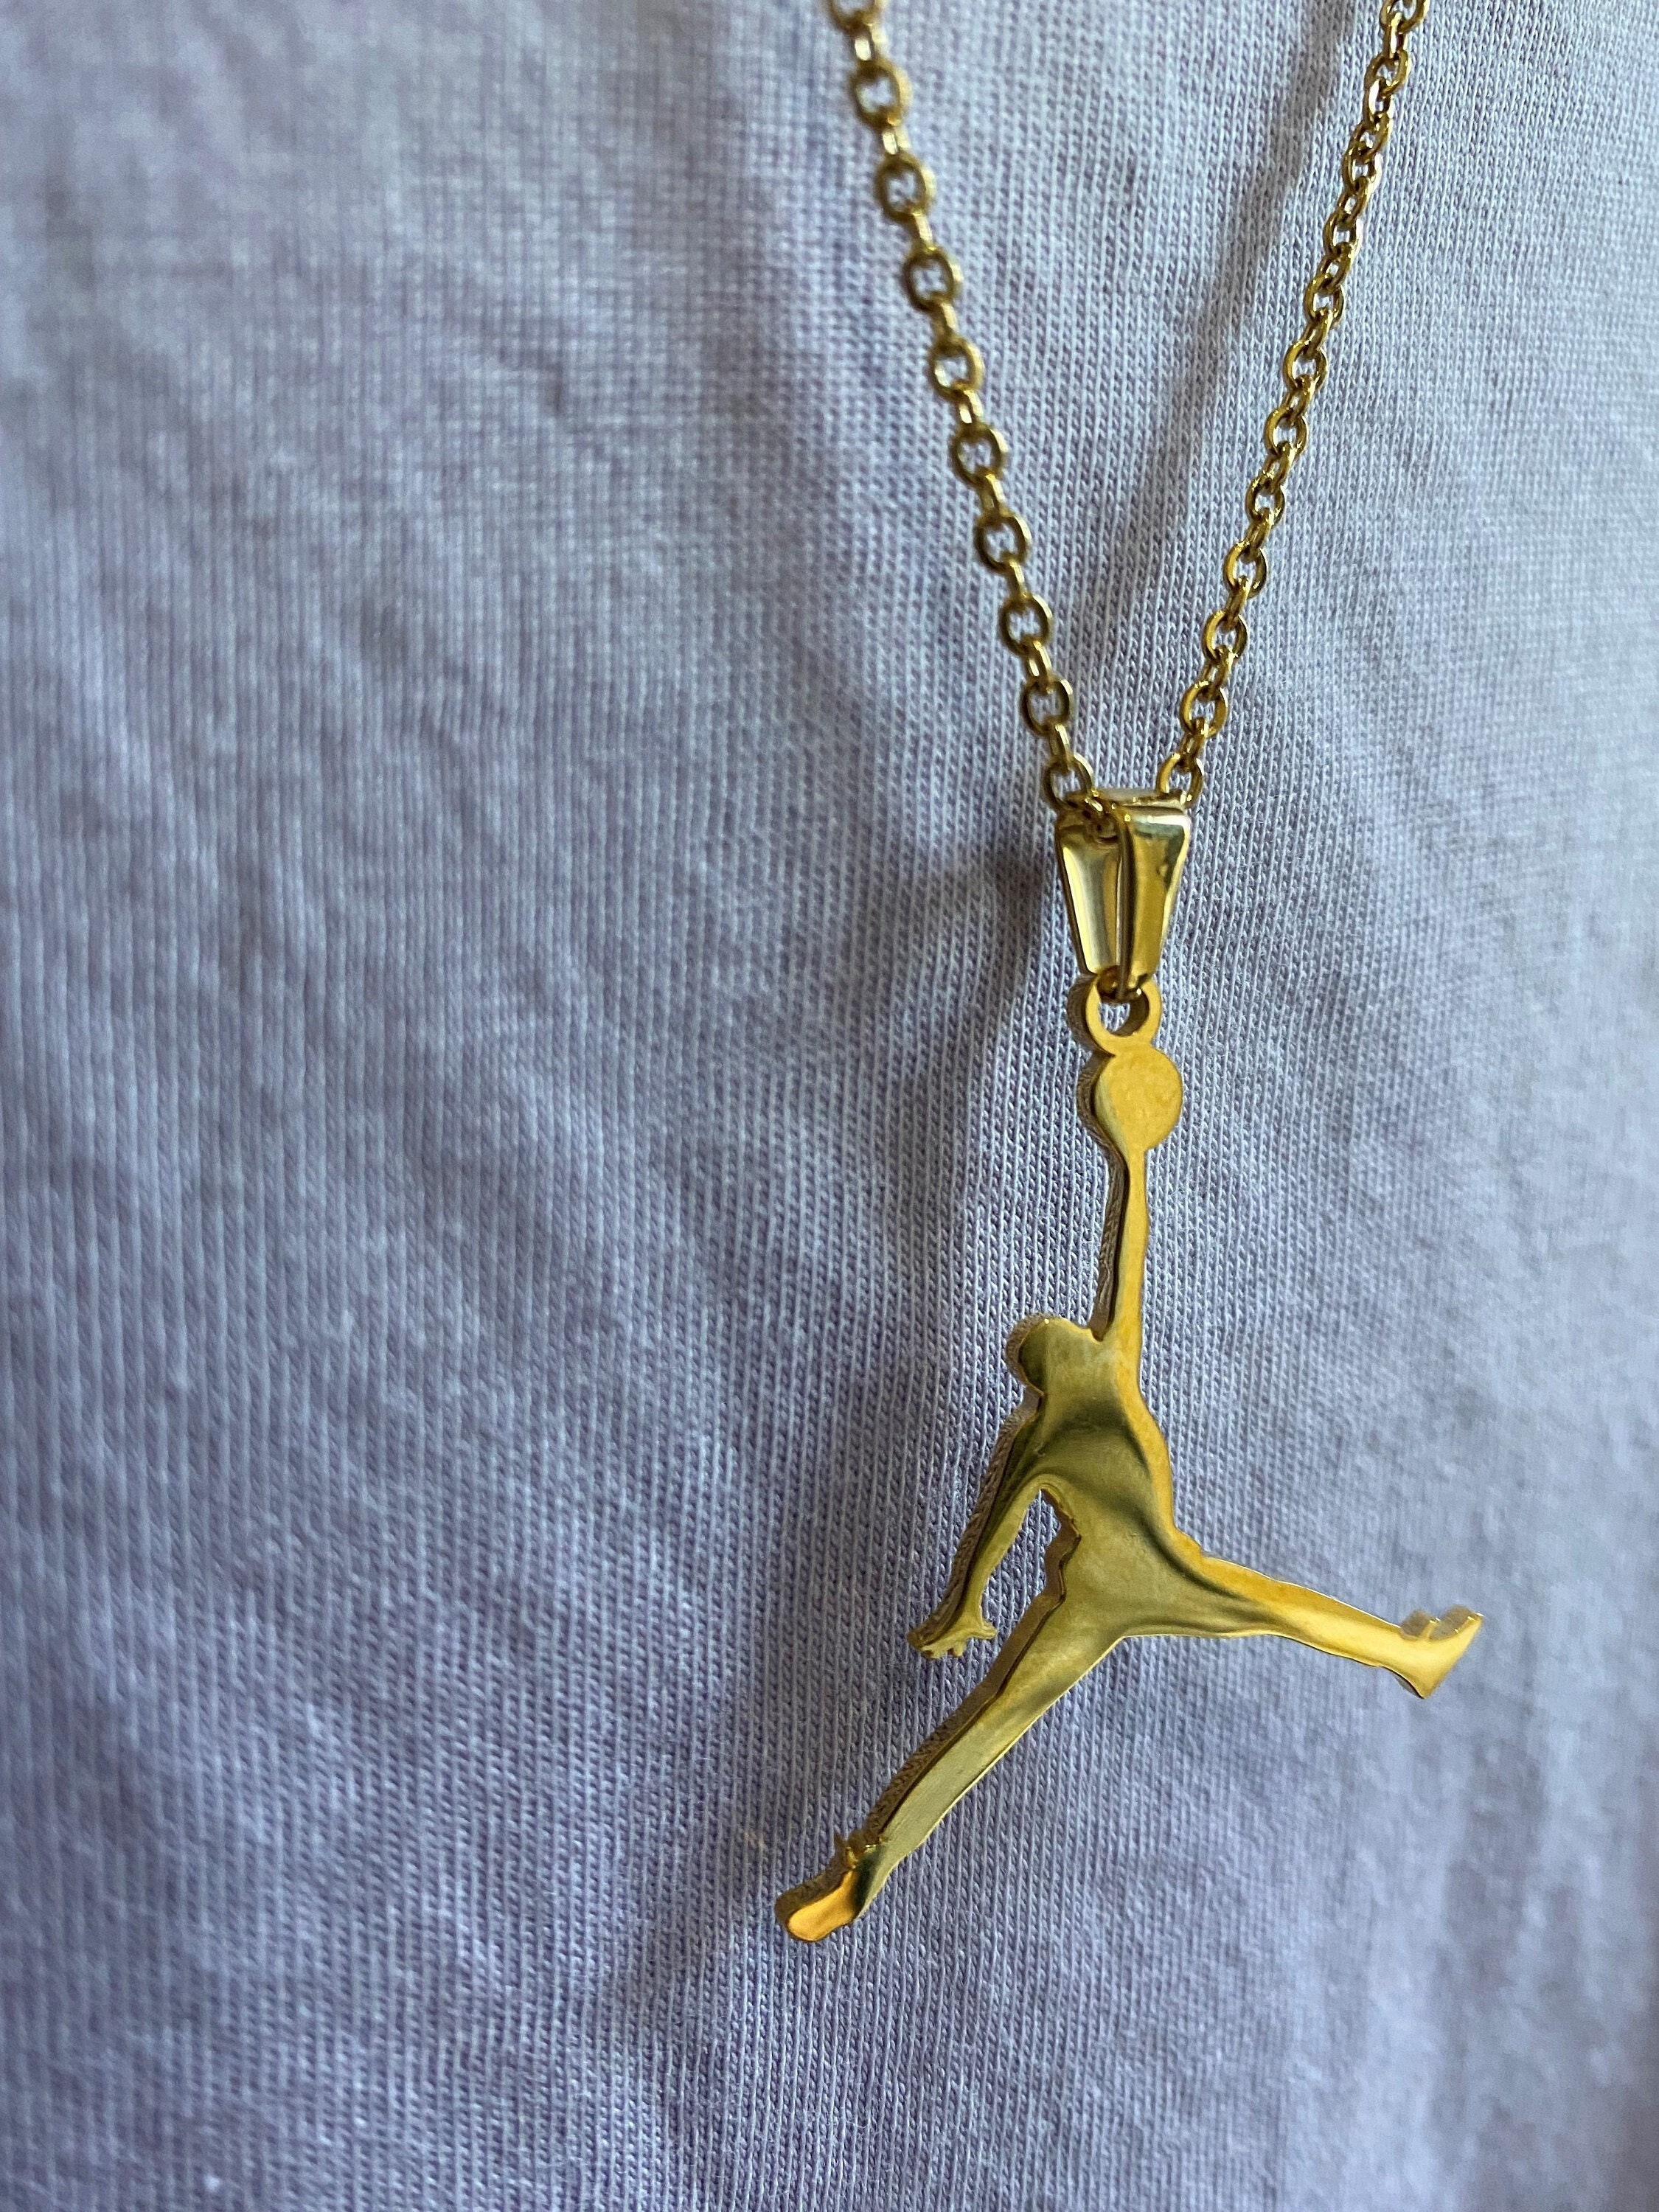 Nike air jordan sneaker necklace pendant stainless steel chain necklace for  men